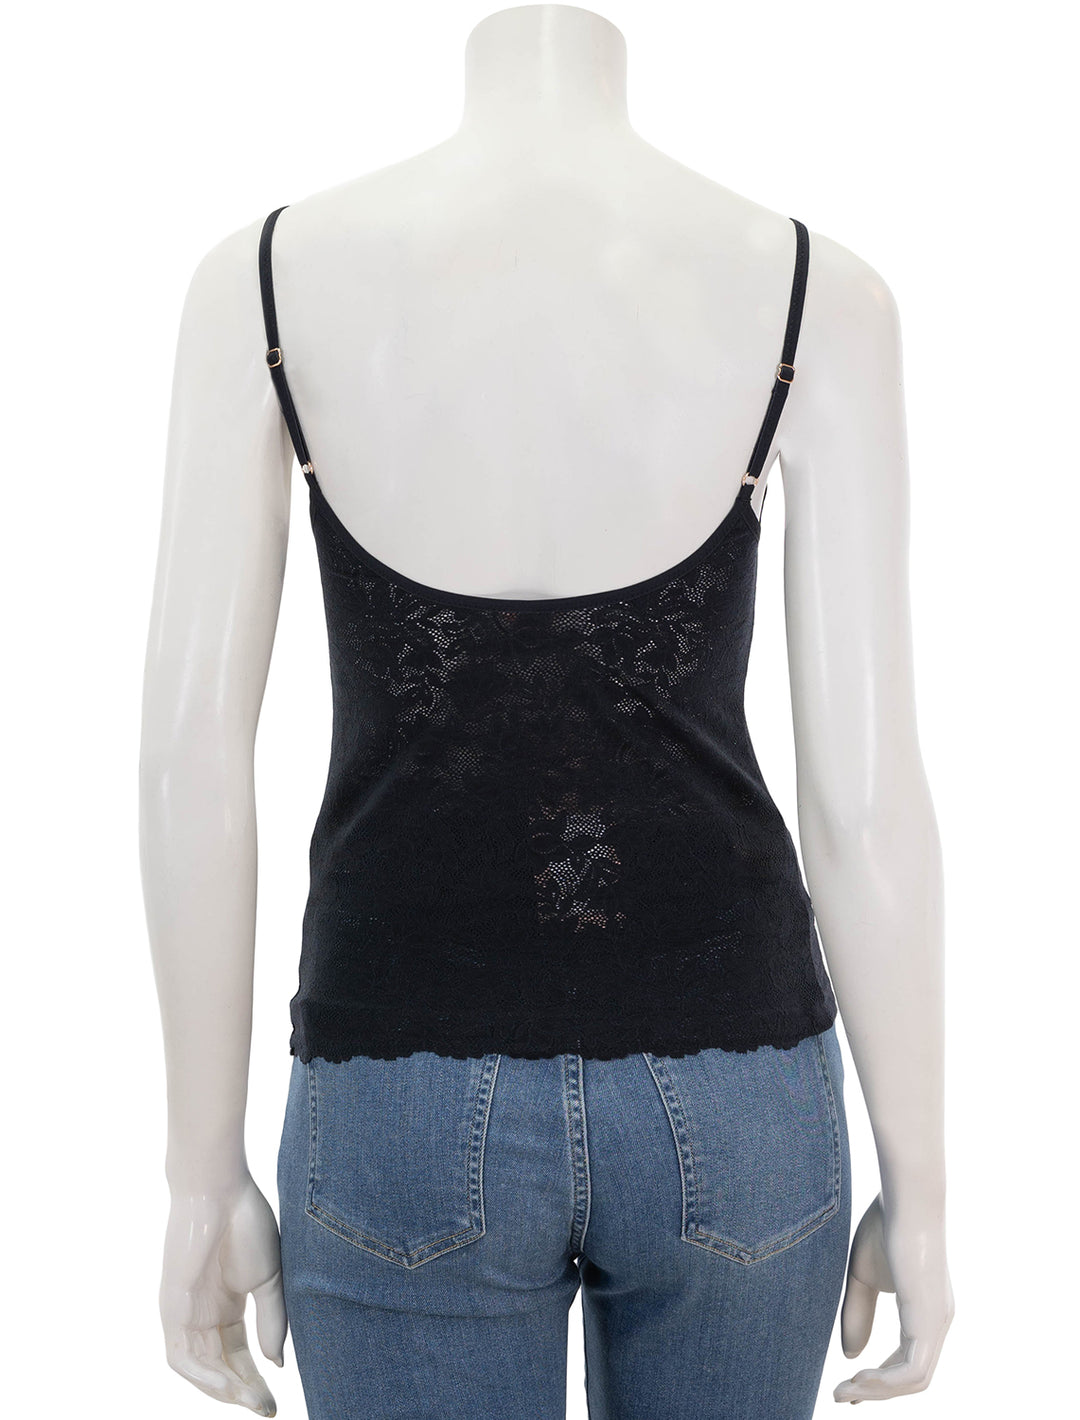 Back view of Eberjey's soft stretch recycled lace cami in black.